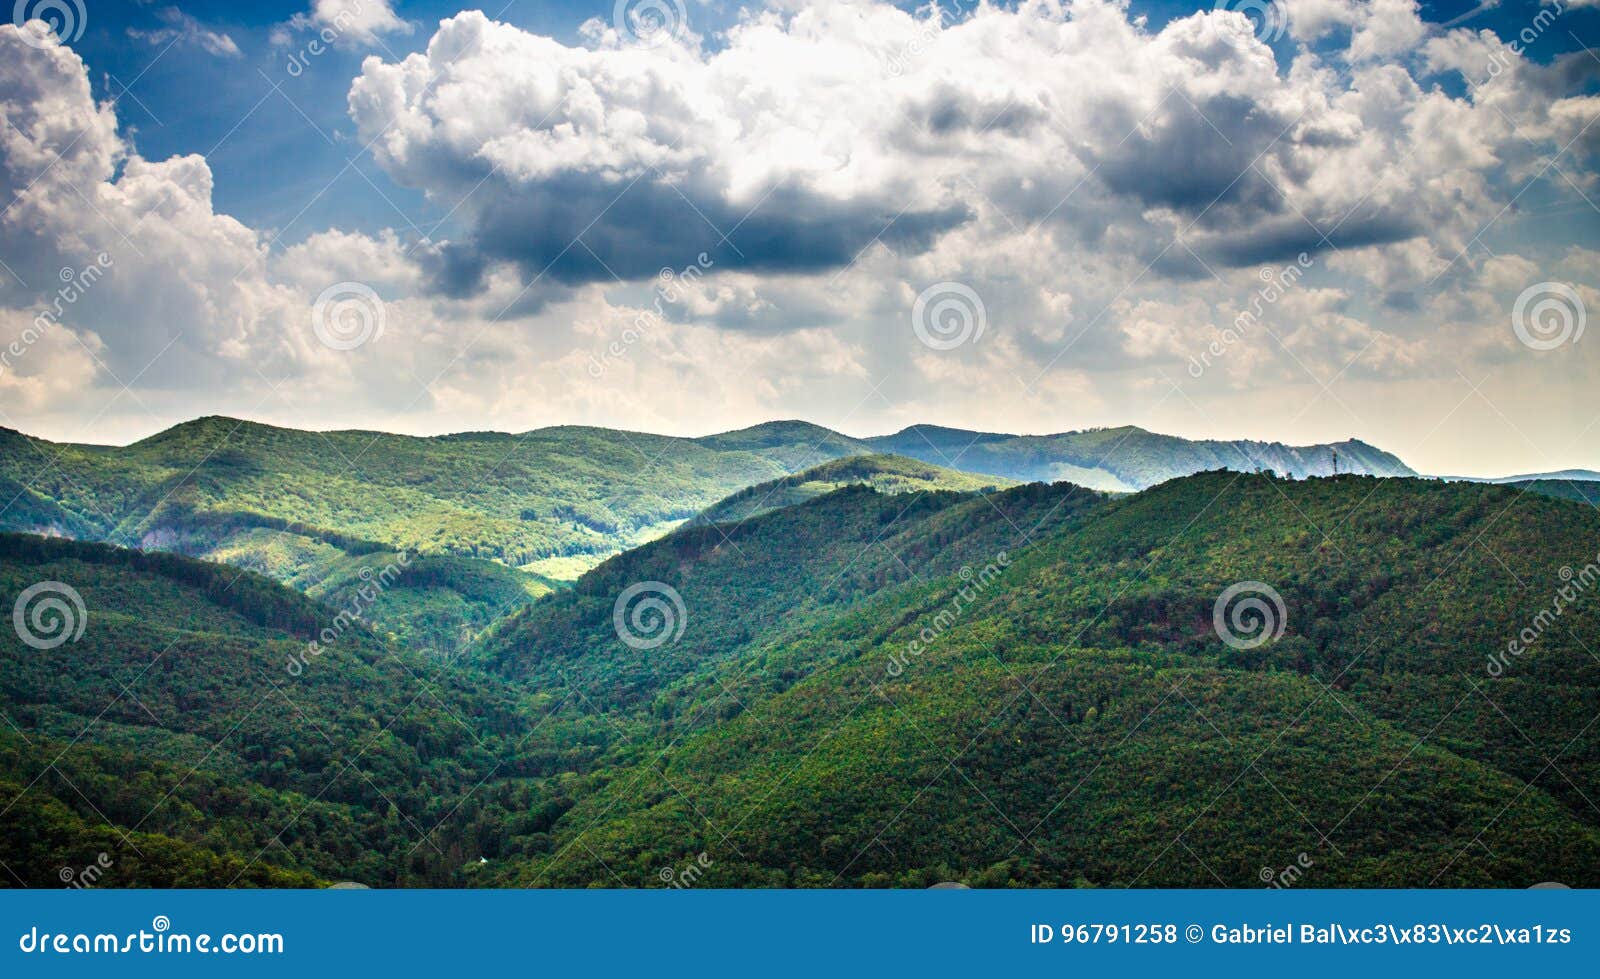 landscape from a famous hiking spot.